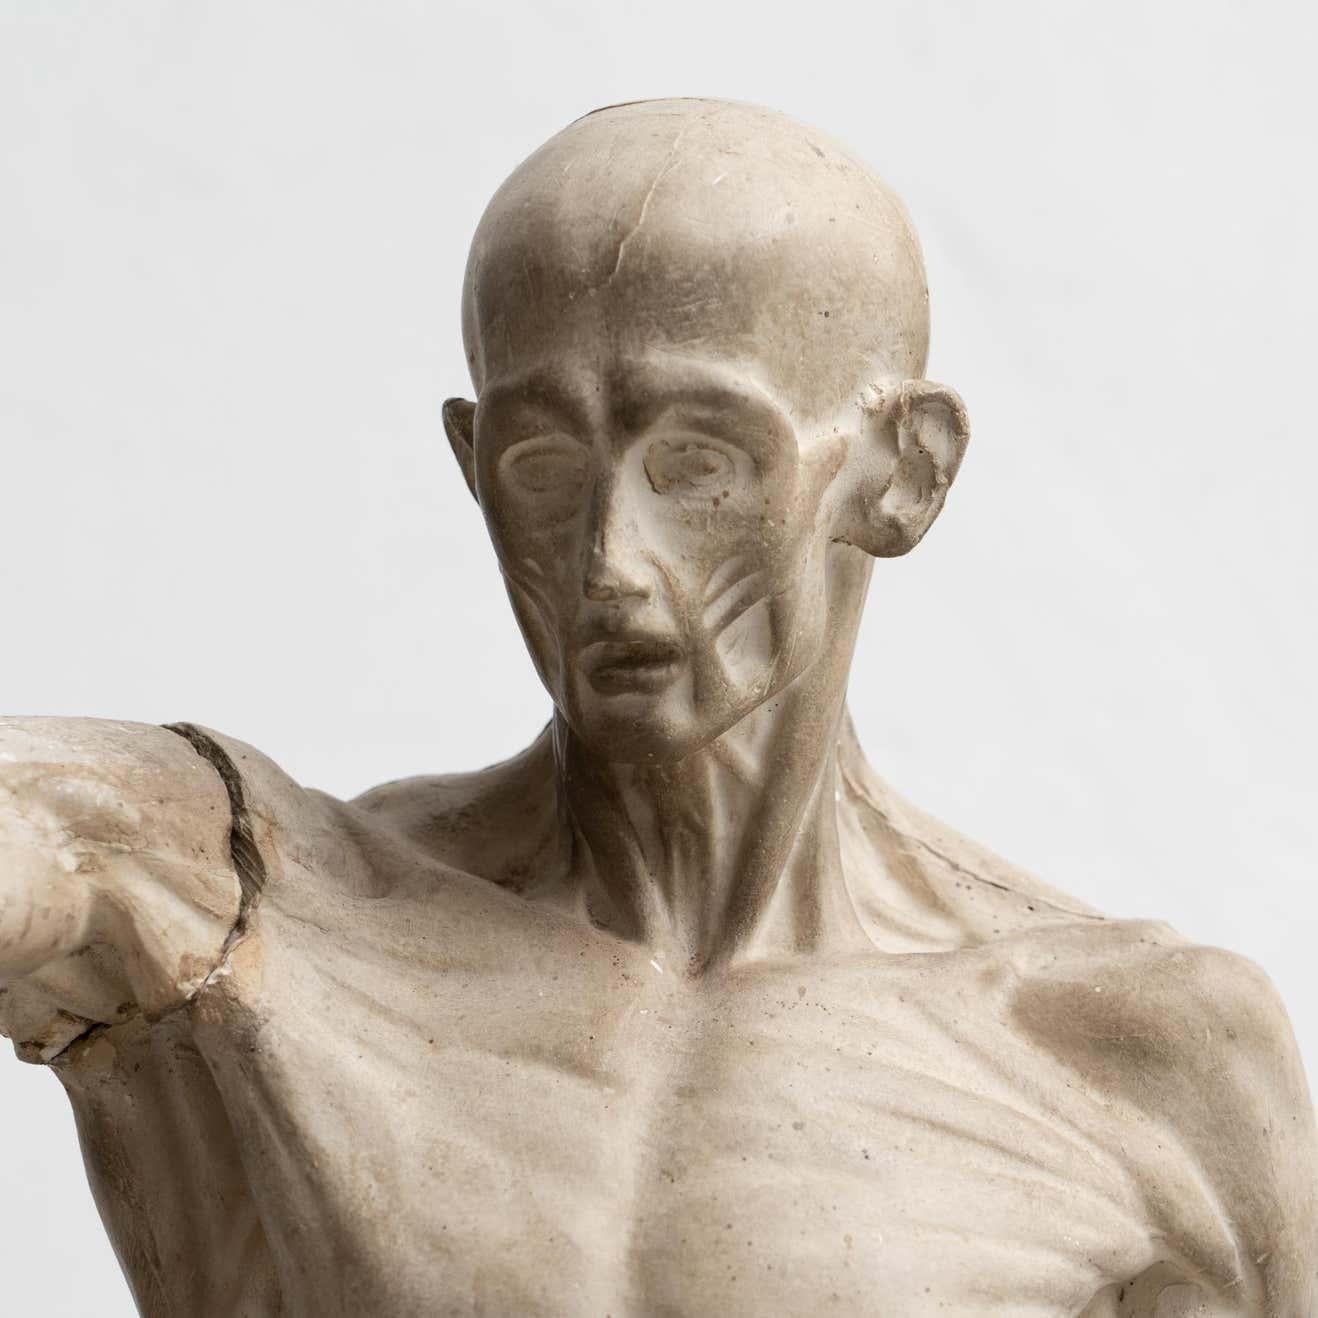 Spanish Rare Find, an Early Plaster Human Anatomy Sculpture of a Man, circa 1930